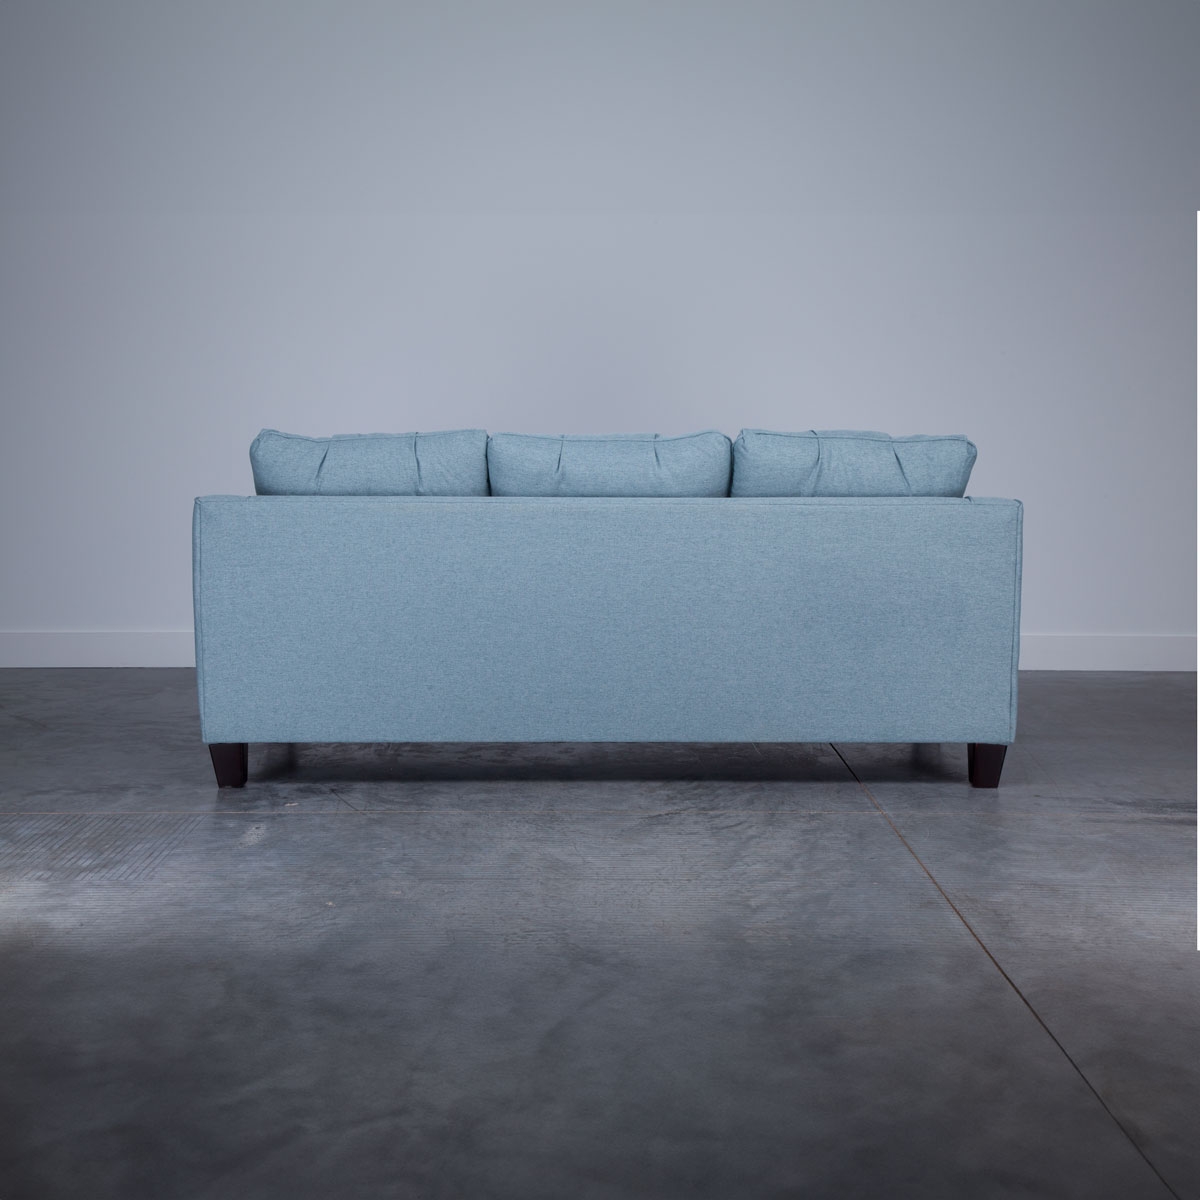 Picture of REYLAN SOFA IN BLUE